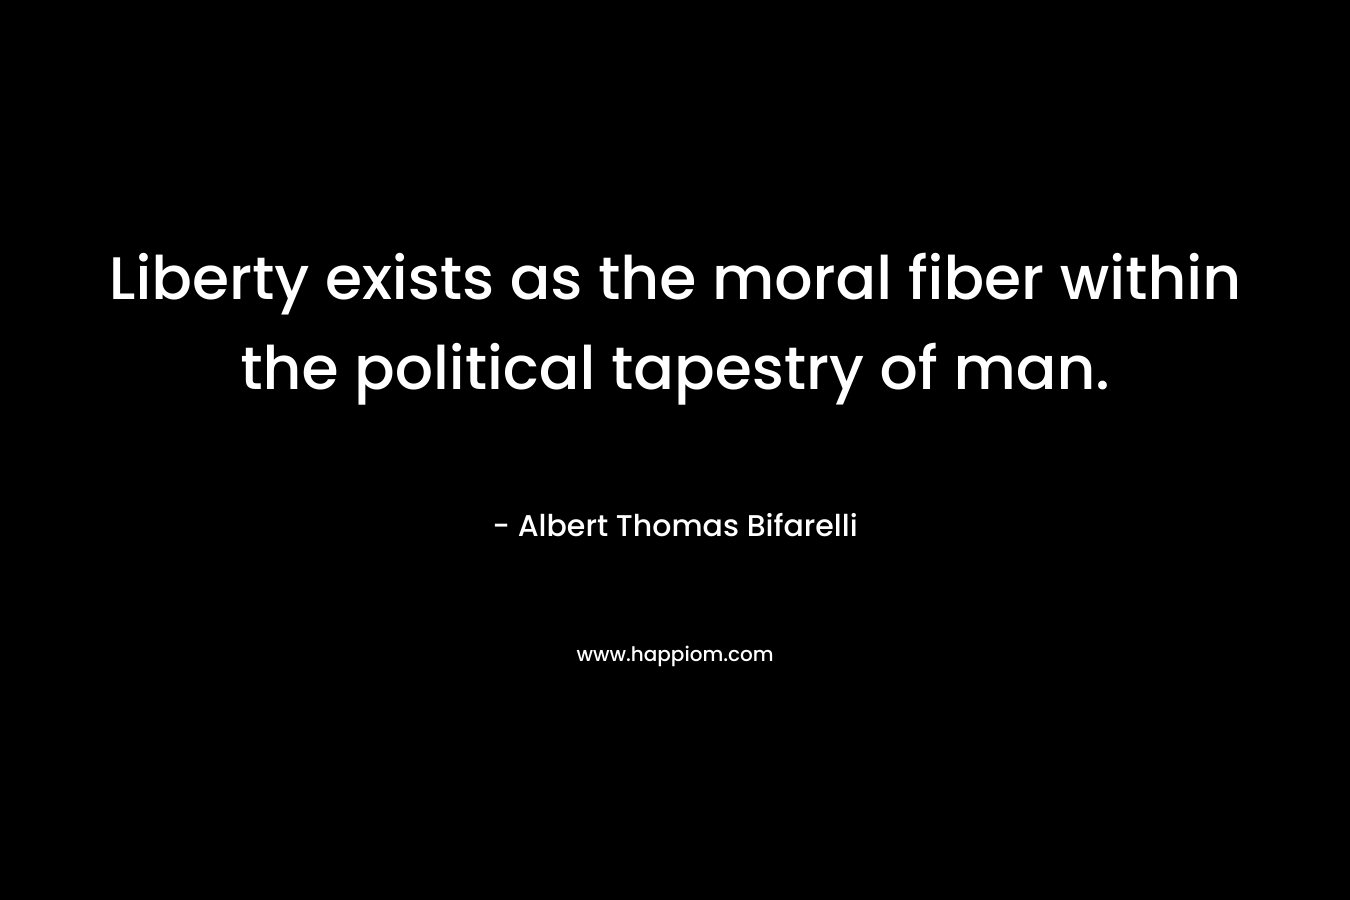 Liberty exists as the moral fiber within the political tapestry of man. – Albert Thomas Bifarelli